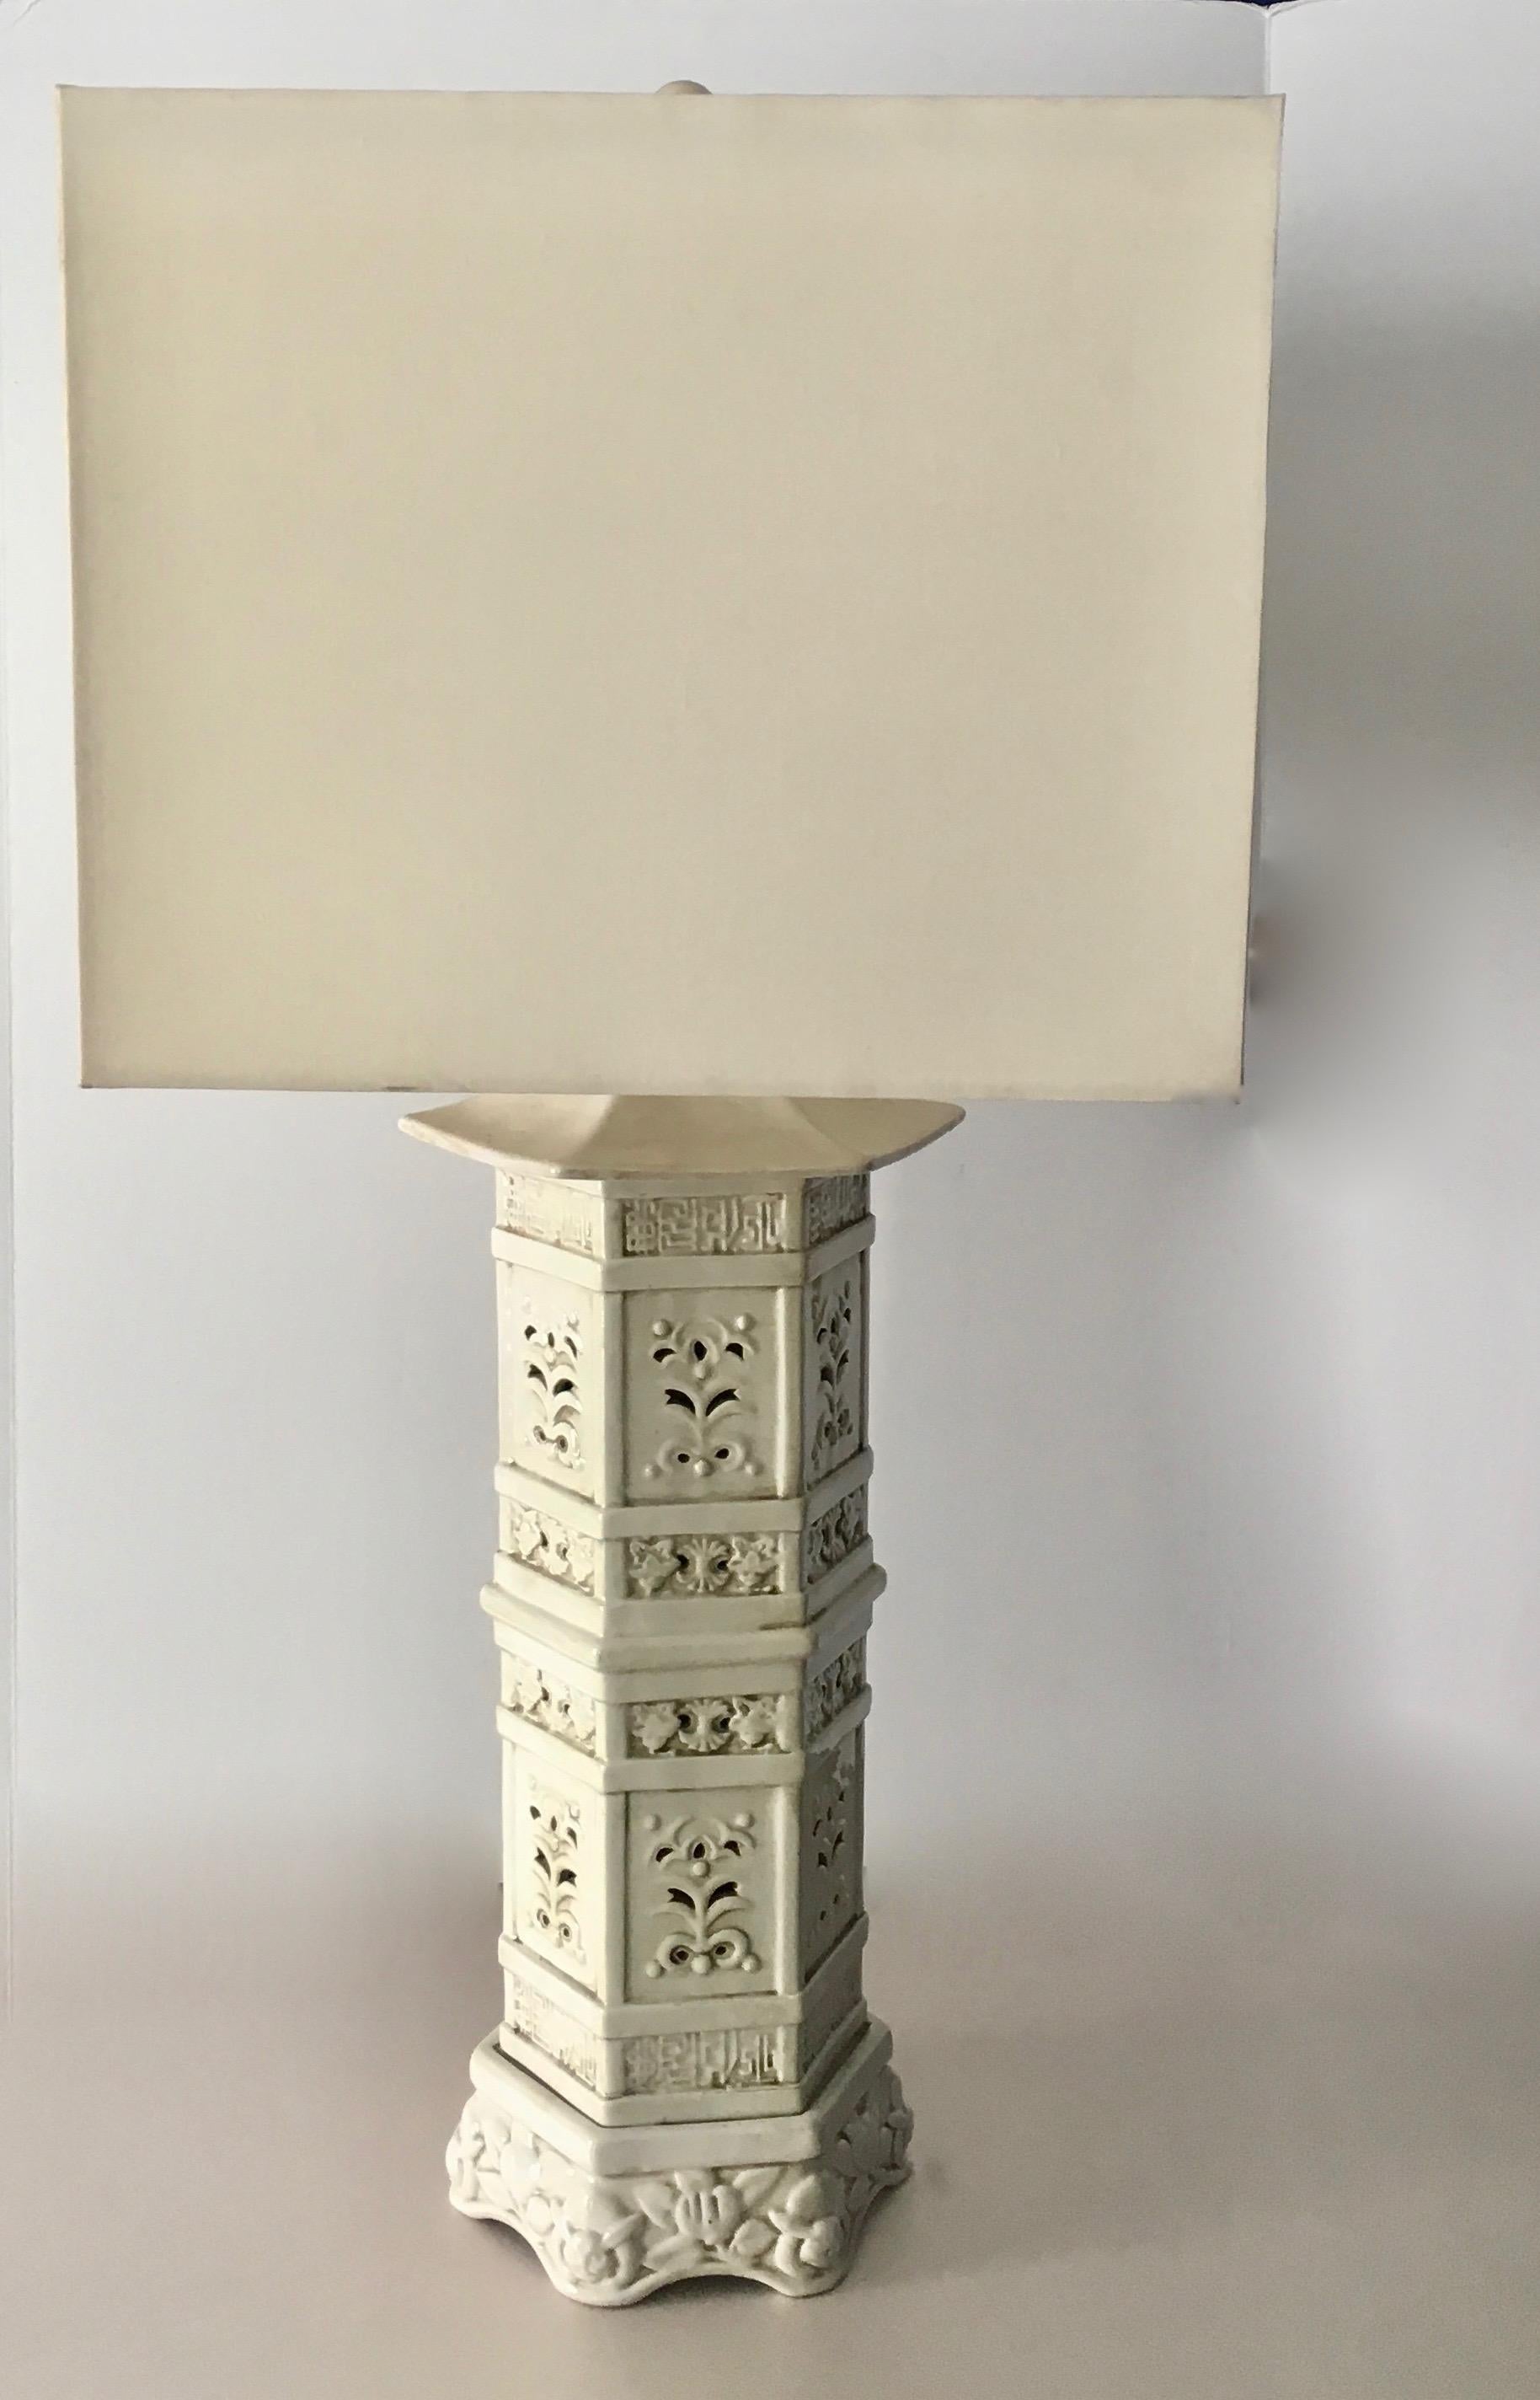 Pair of Pagoda style Italian ceramic lamps - lamps are rewired and have a night light inside the canister portion of the lamp. Elegant and perfect for your new living room, bedroom or den. The lamps include shades

Shade is 14.5 square.